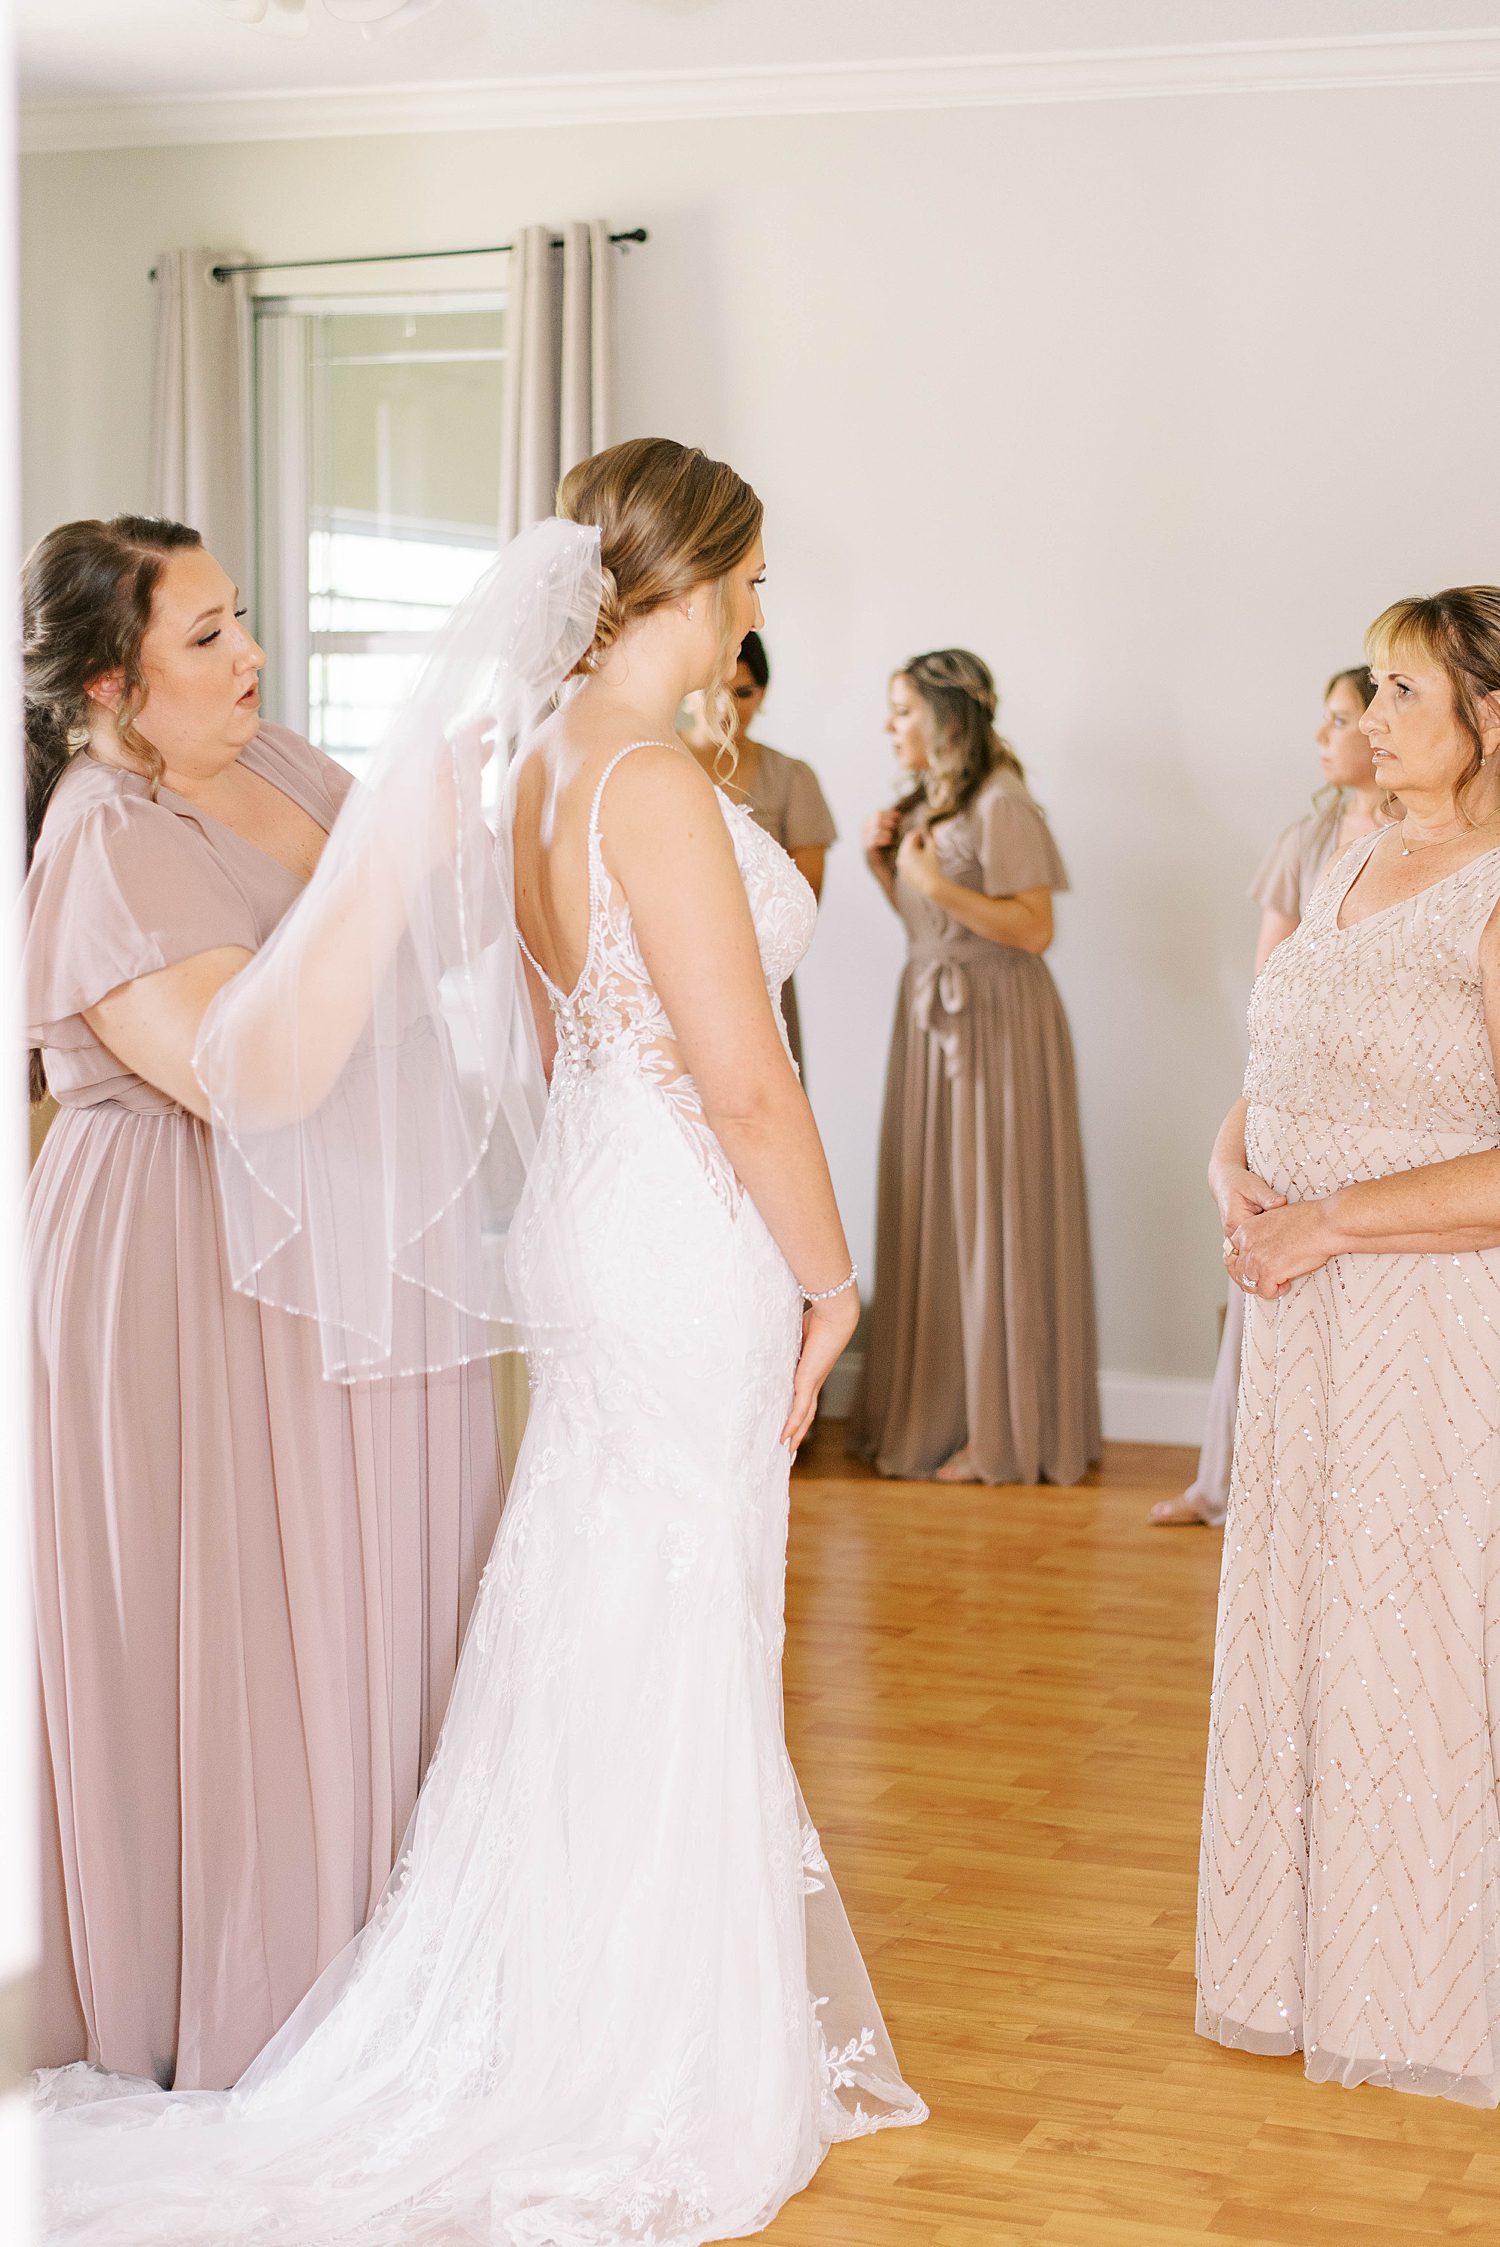 mother and bridesmaids help bride into wedding dress and veil